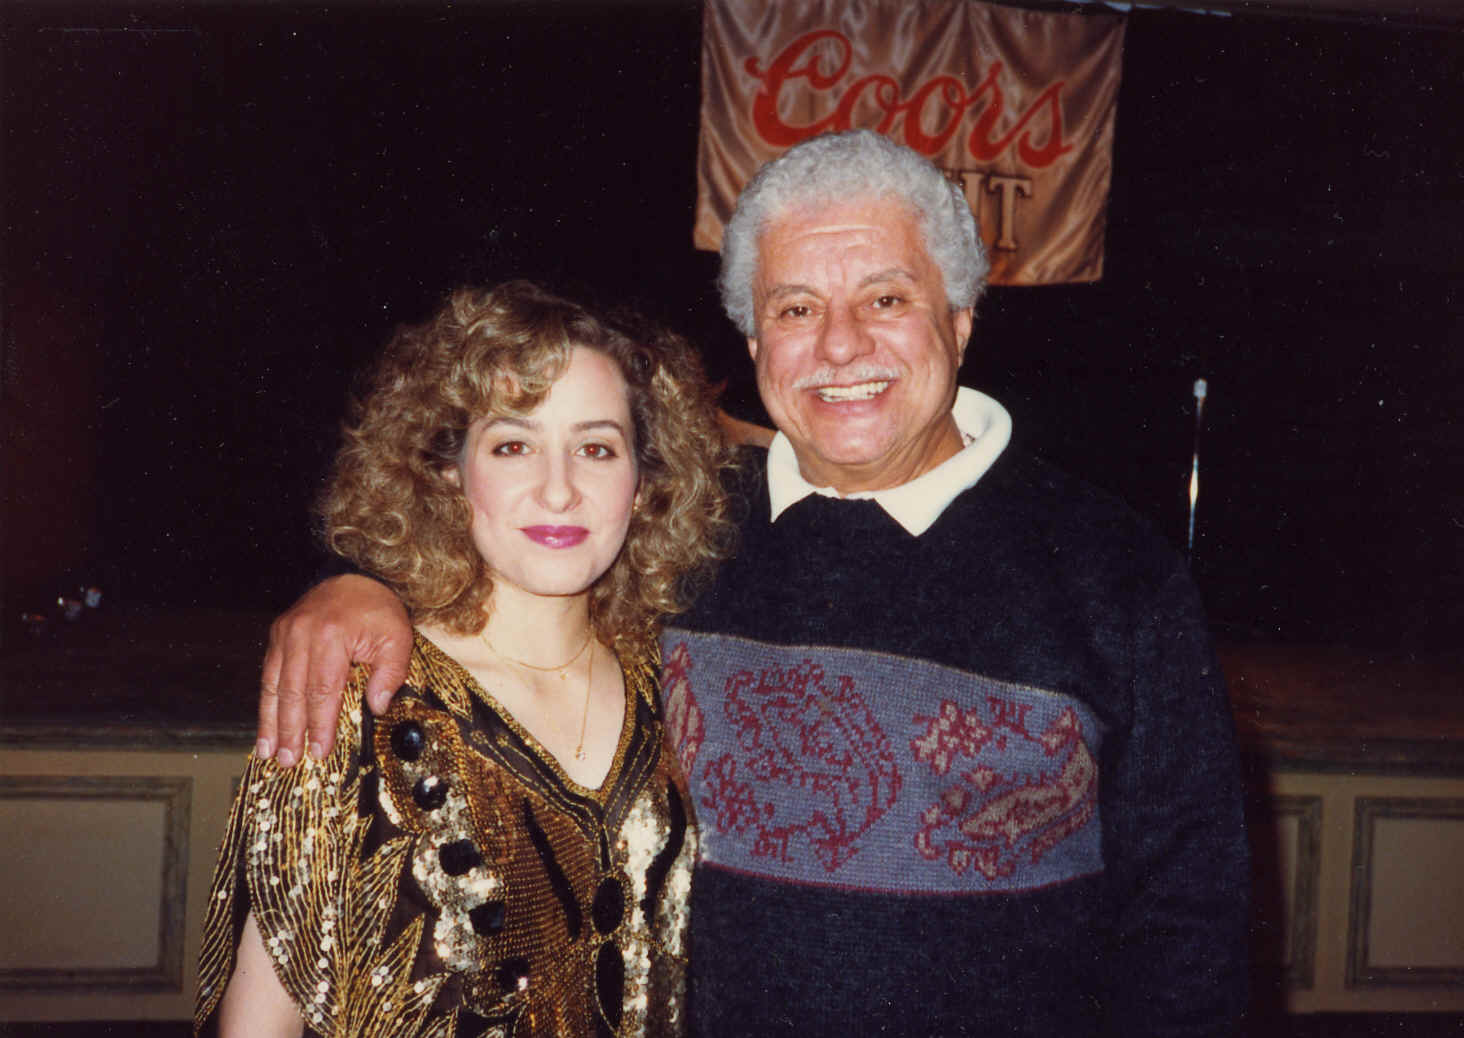 With the King of Salsa...Tito Puente